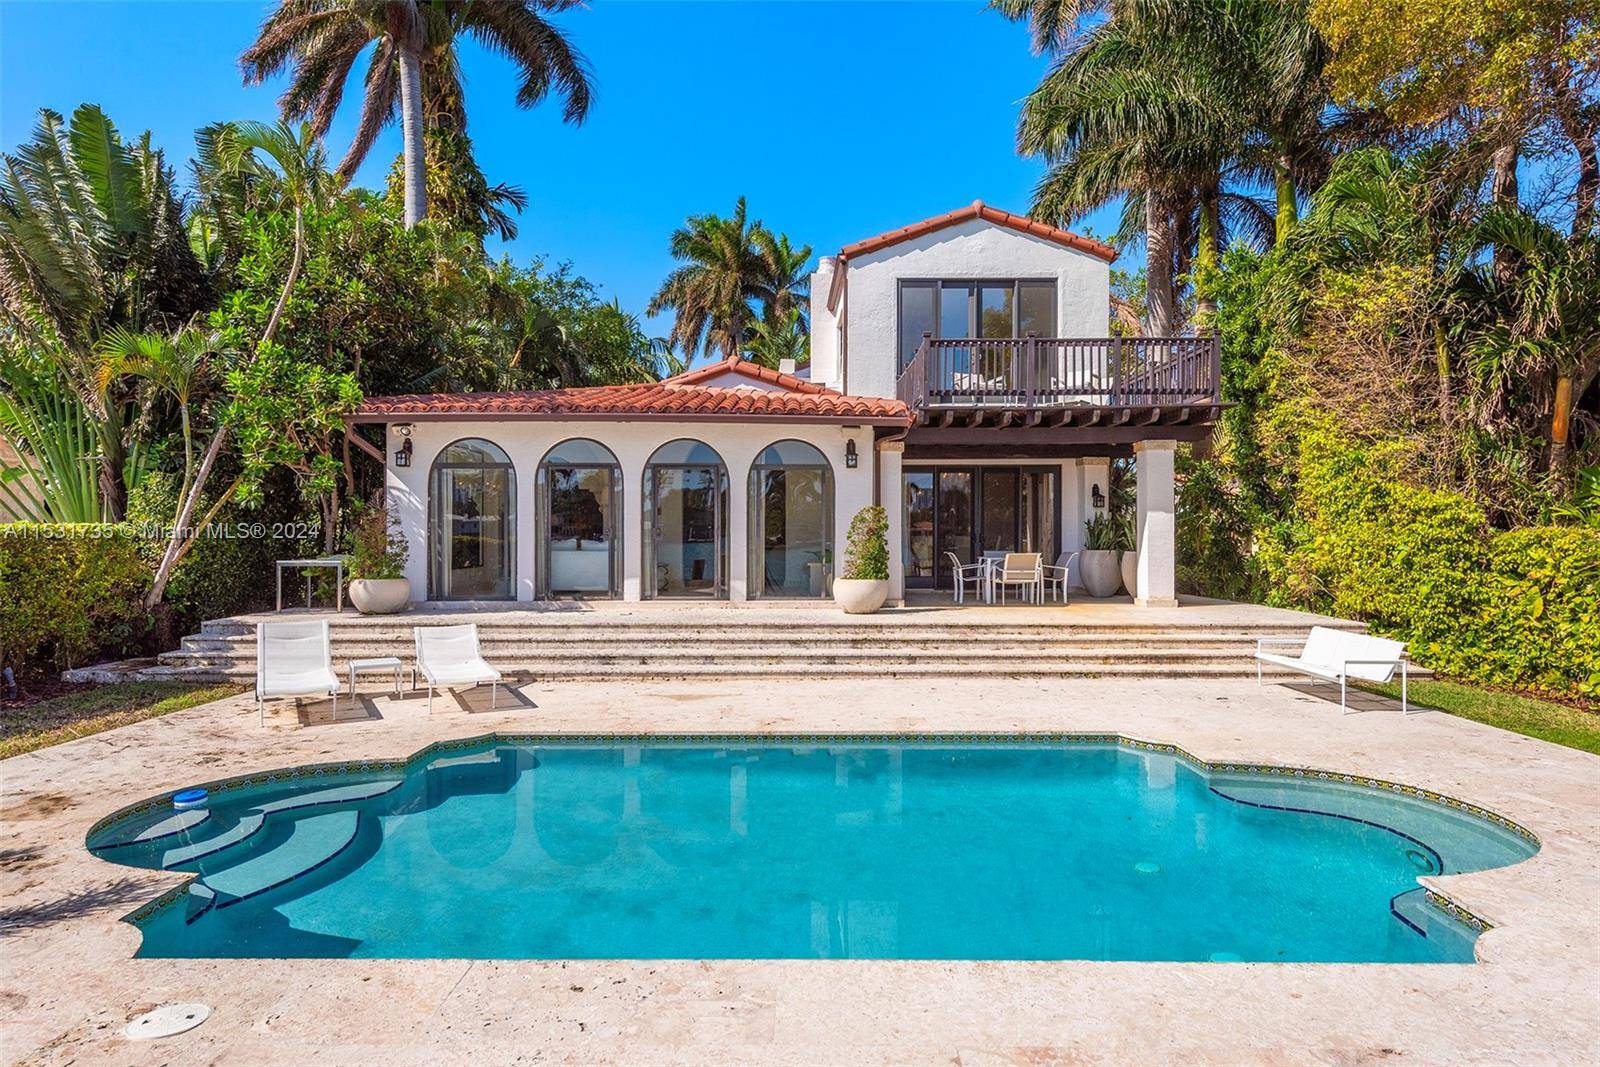 El Escape an Italian Villa nestled within the lush Venetian Islands features stunning, original architectural details and panoramic vistas of Biscayne Bay from every angle !